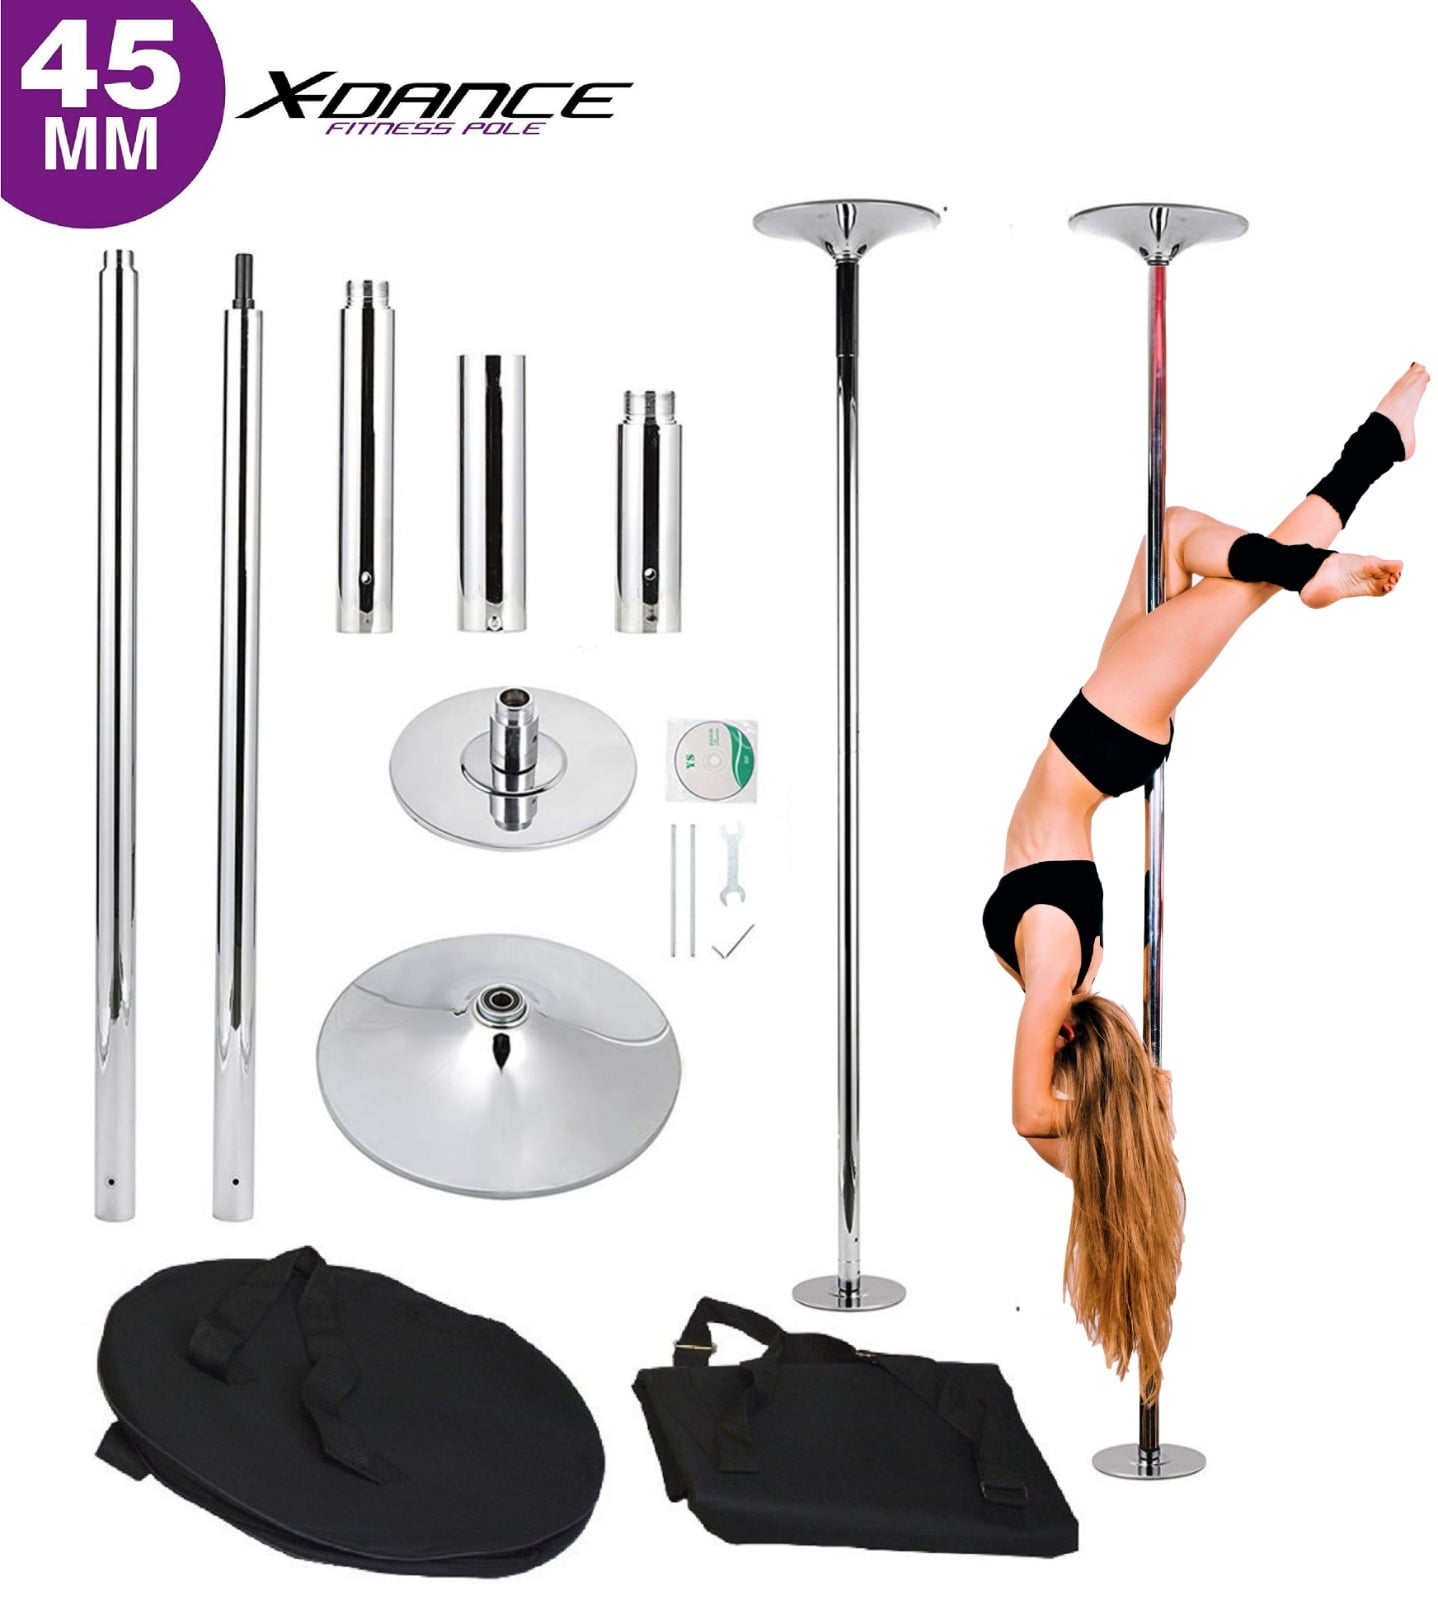 Topeakmart 45mm Portable Professional Stripper Pole Spinning and Static Dance Pole Kit Removable Fitness Exercise Dancing Pole 